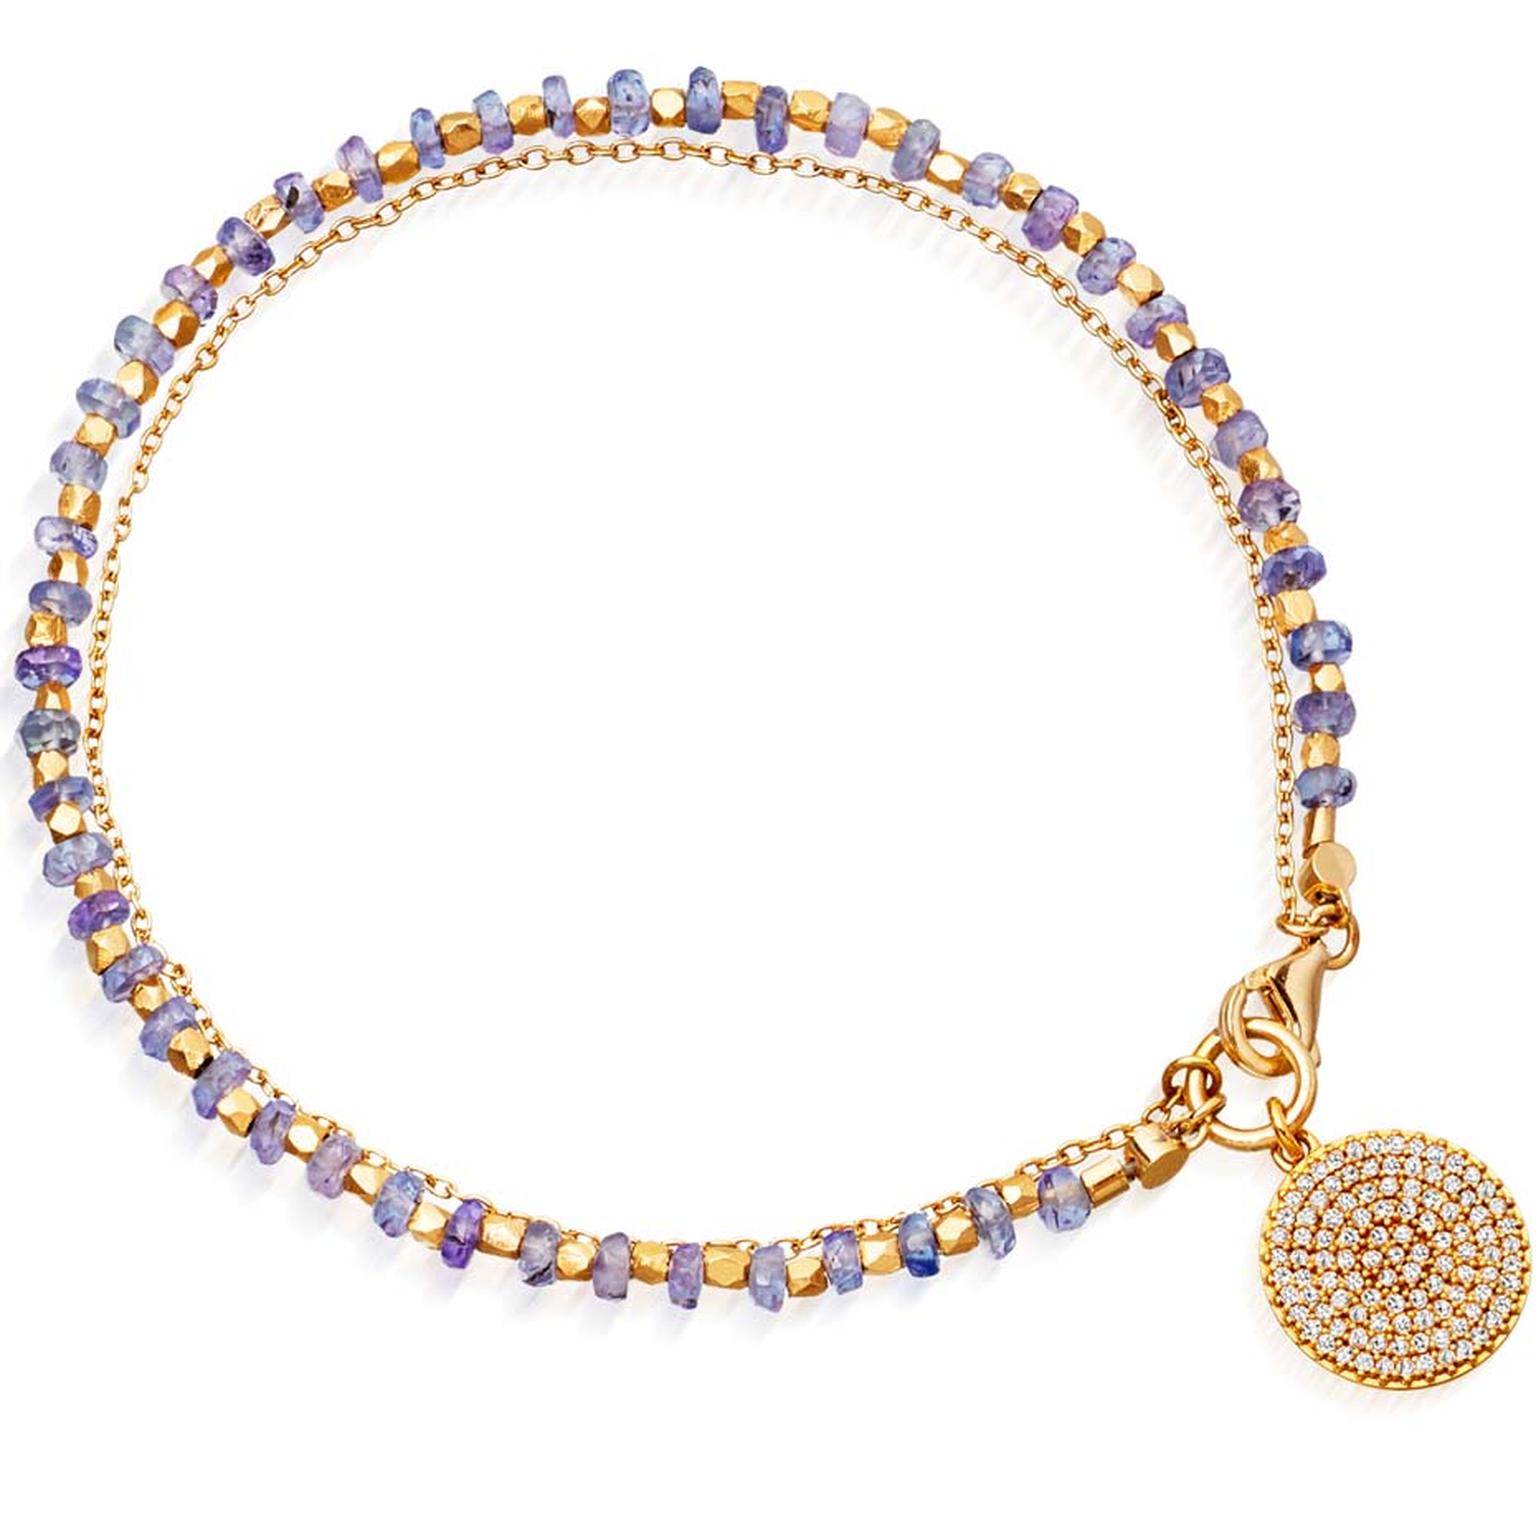 14ct yellow gold and tanzanite icon bracelet from Astley Clarke's fine biography collection.